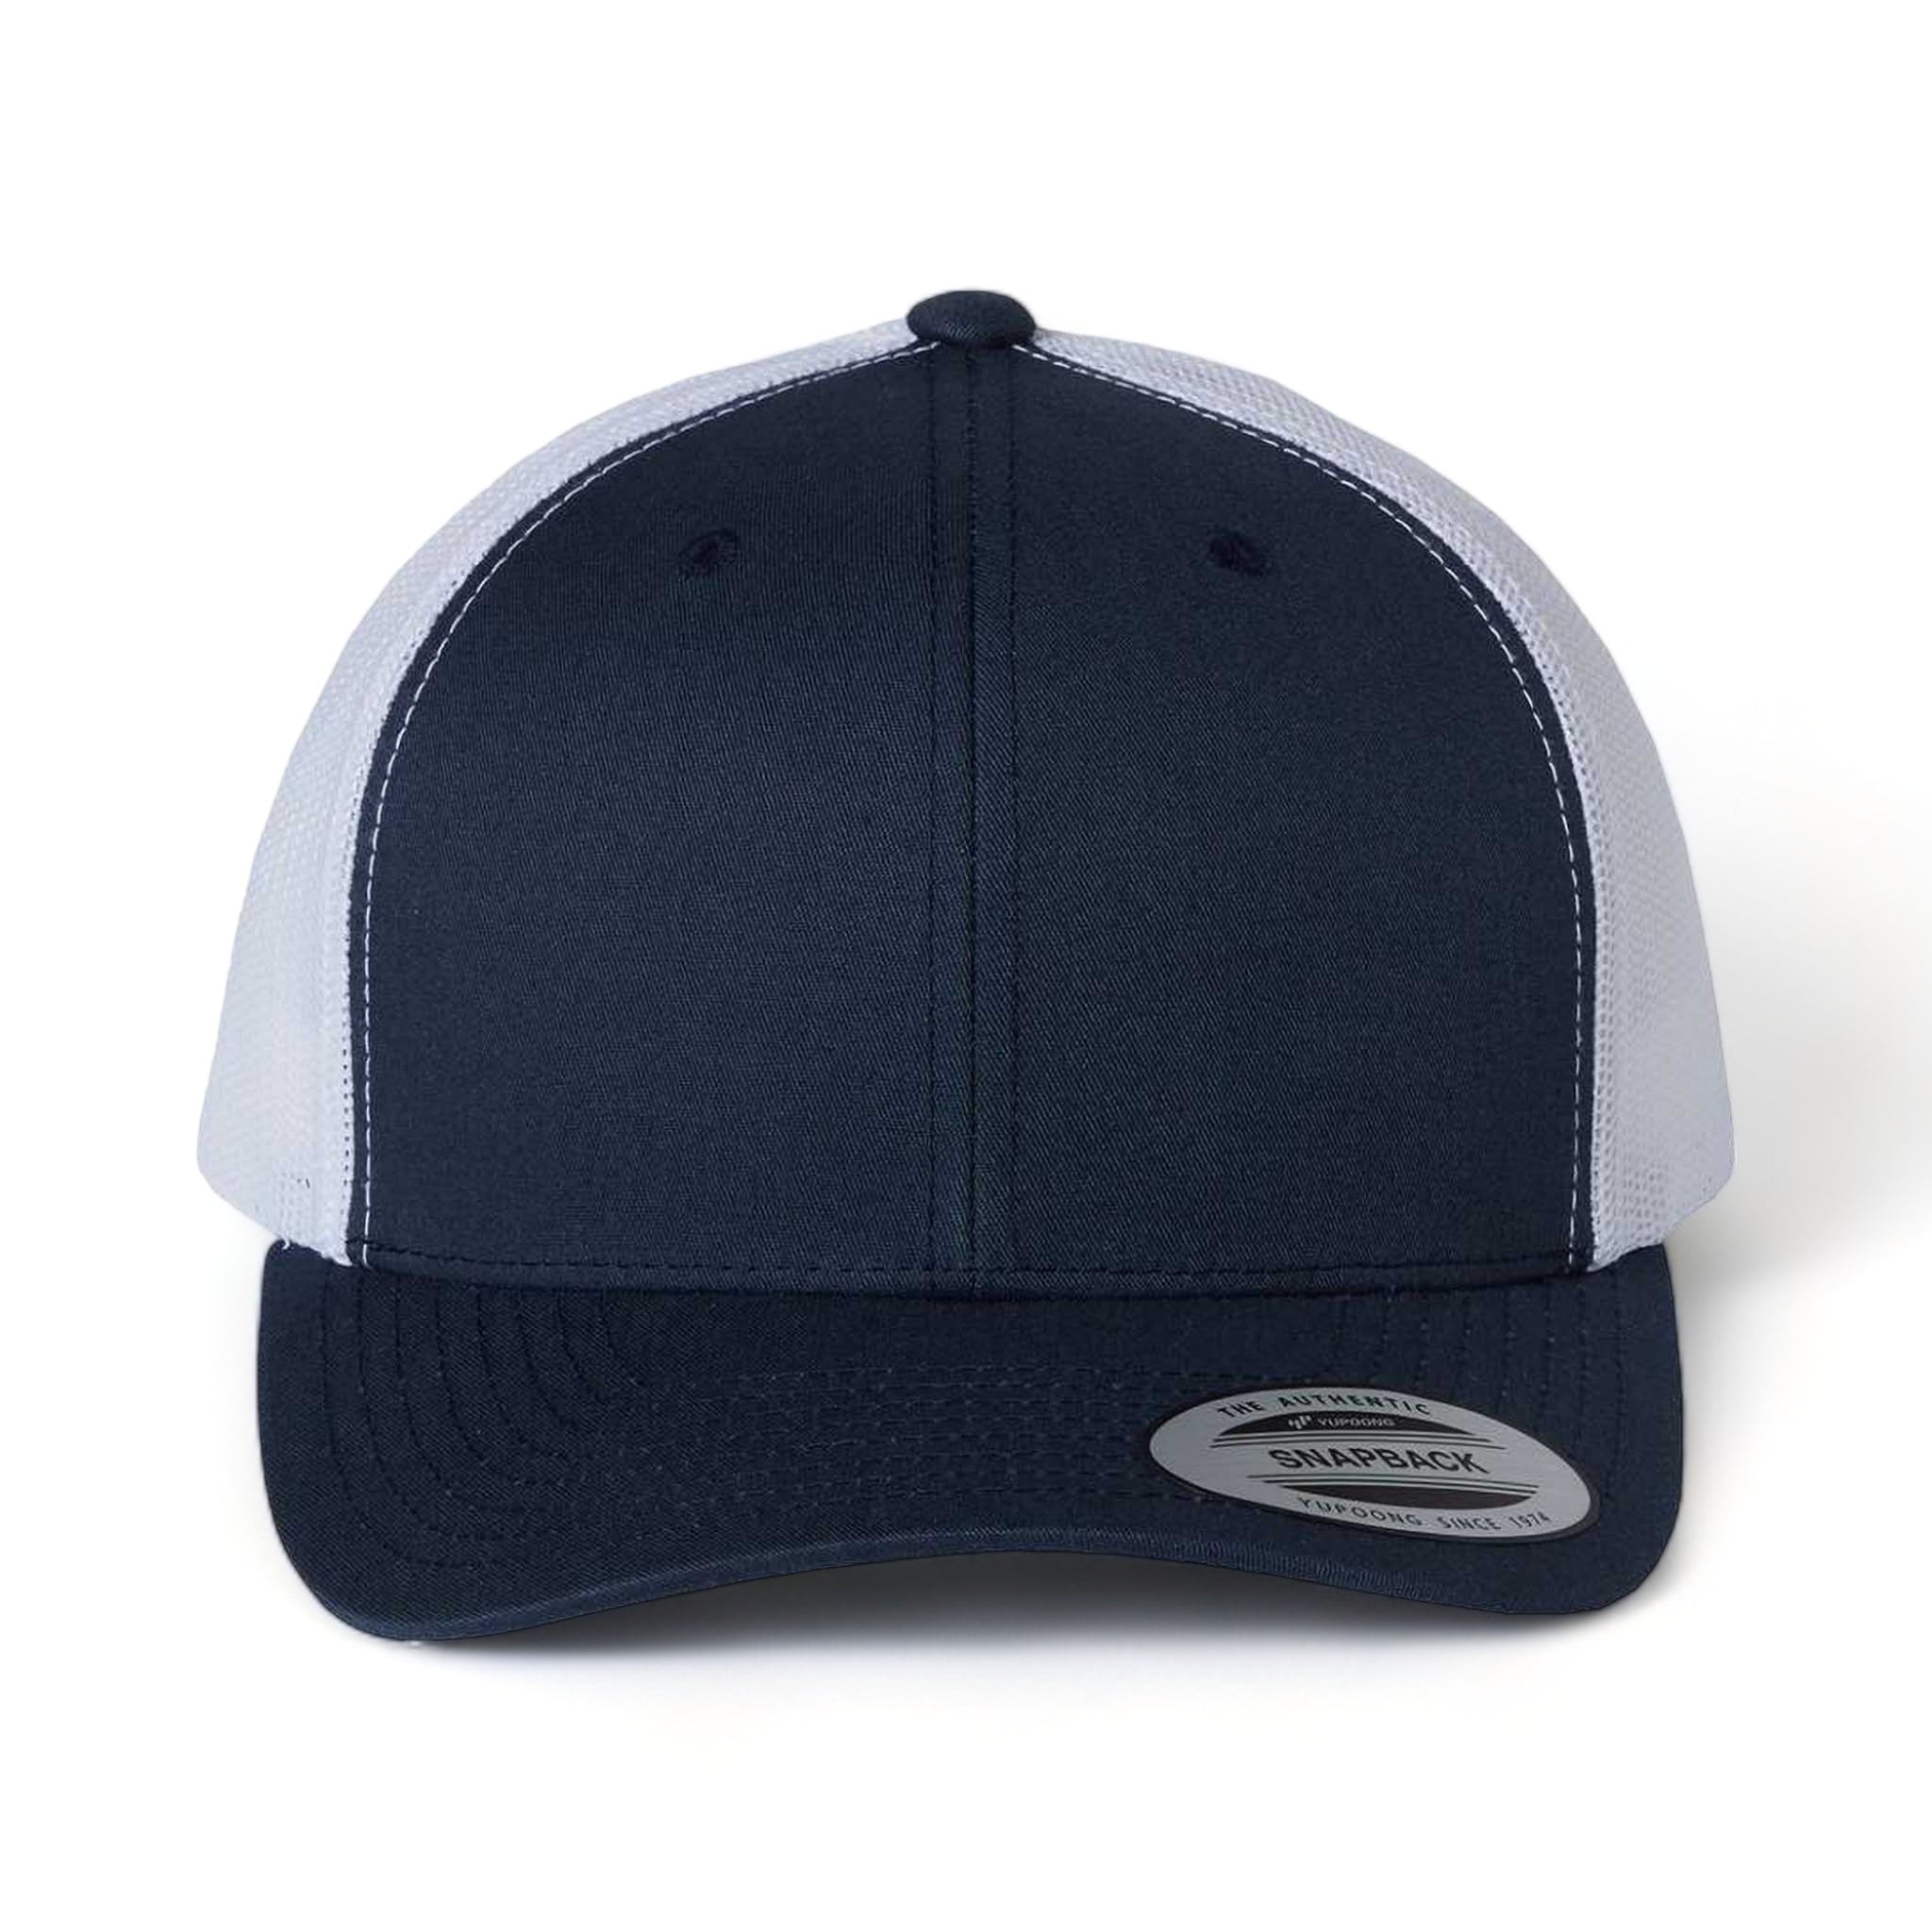 Front view of YP Classics 6606 custom hat in navy and white